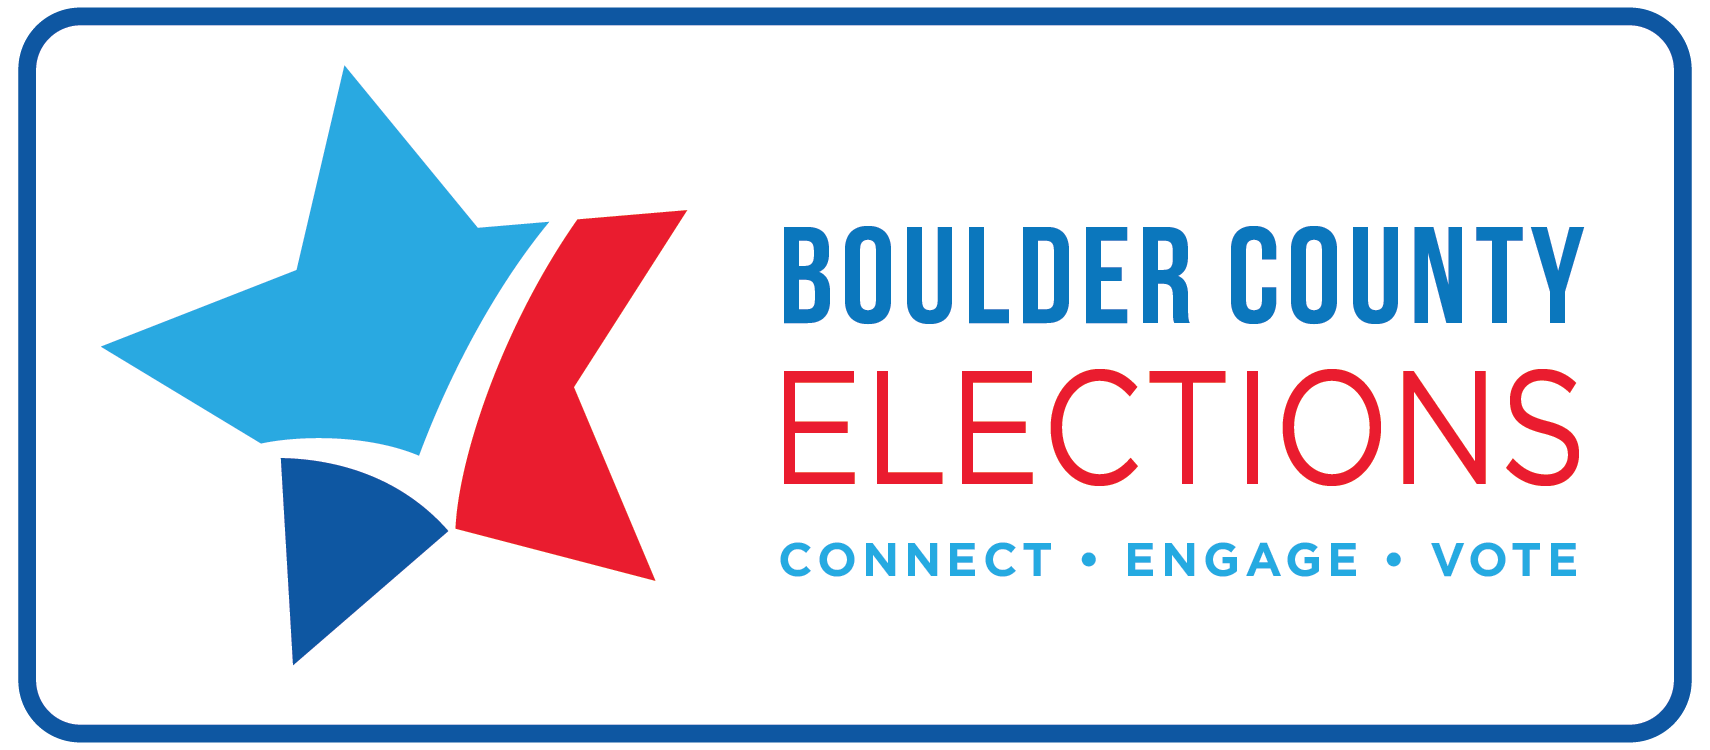 Boulder County Elections